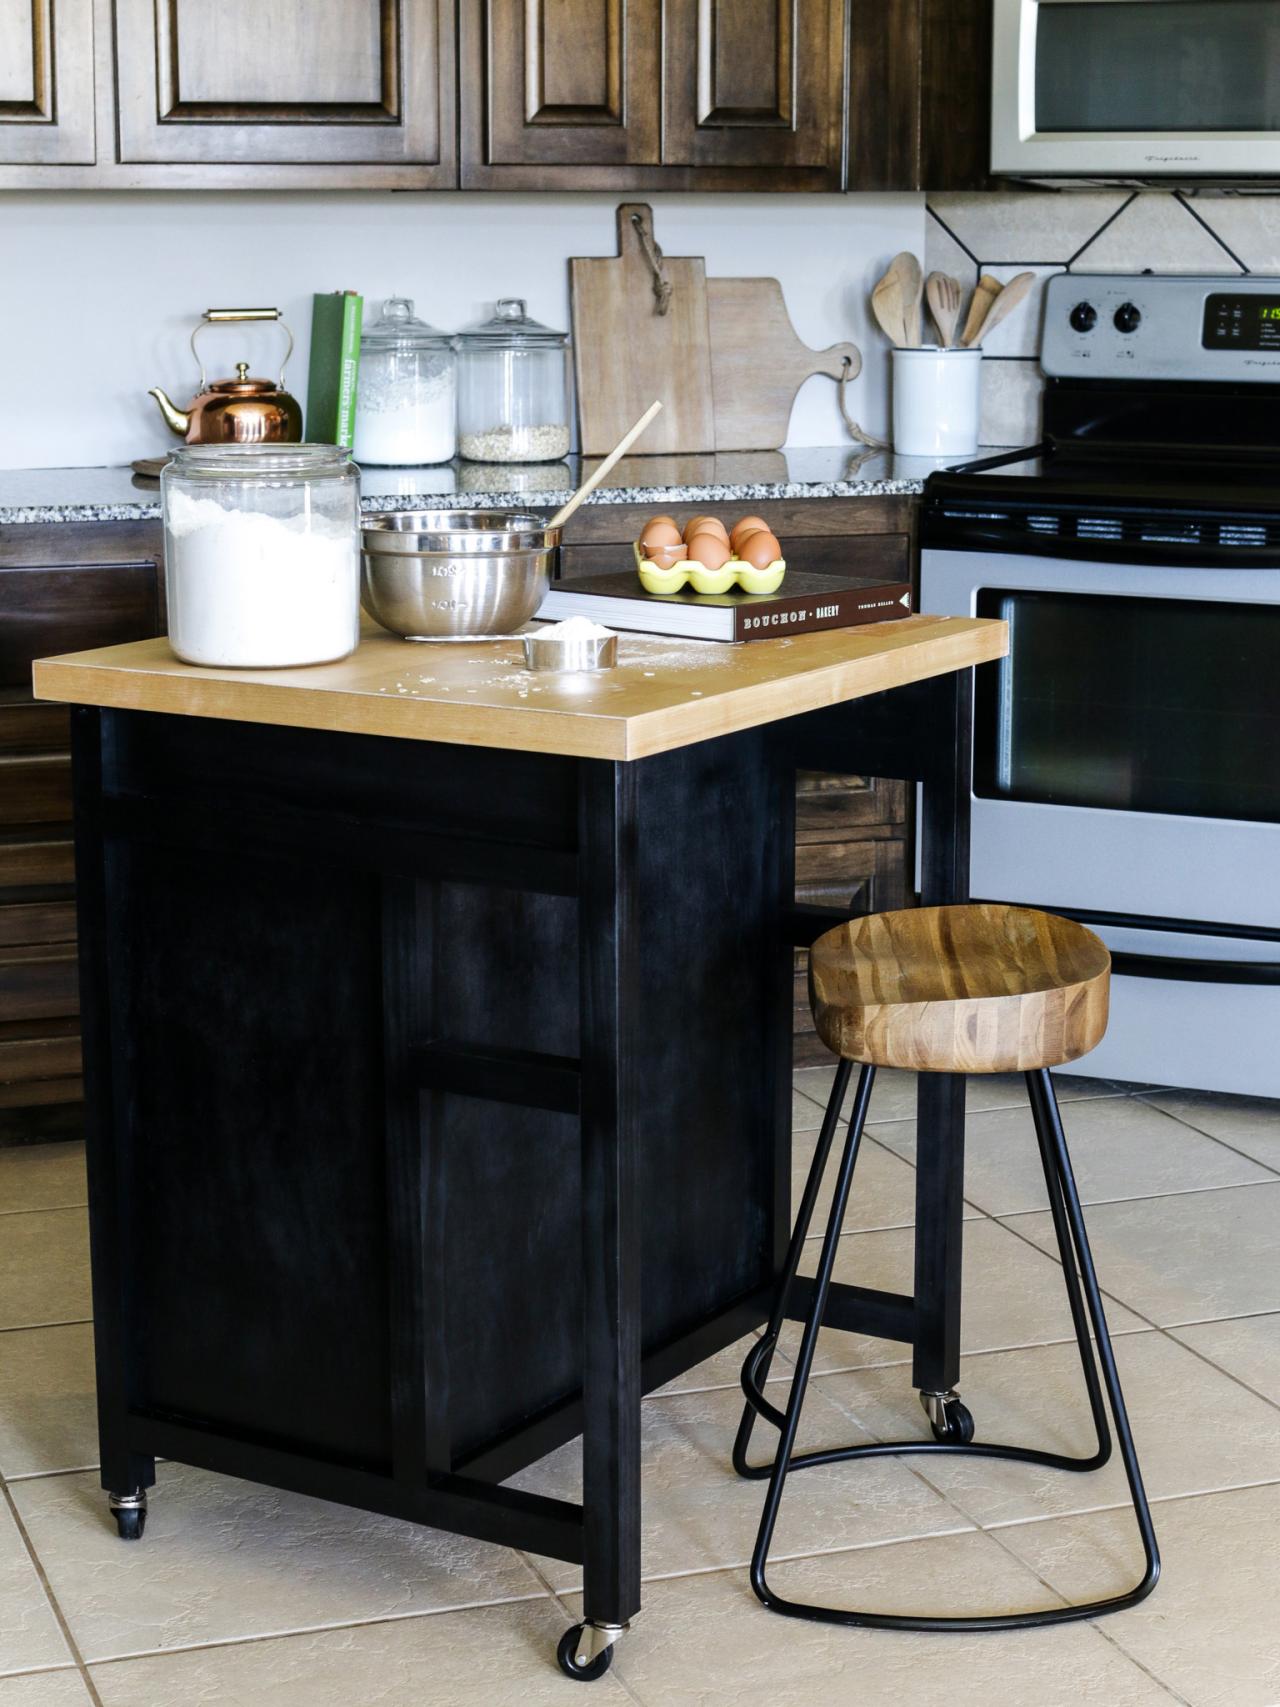 To Build A Diy Kitchen Island On Wheels, Diy Kitchen Island Plans With Seating